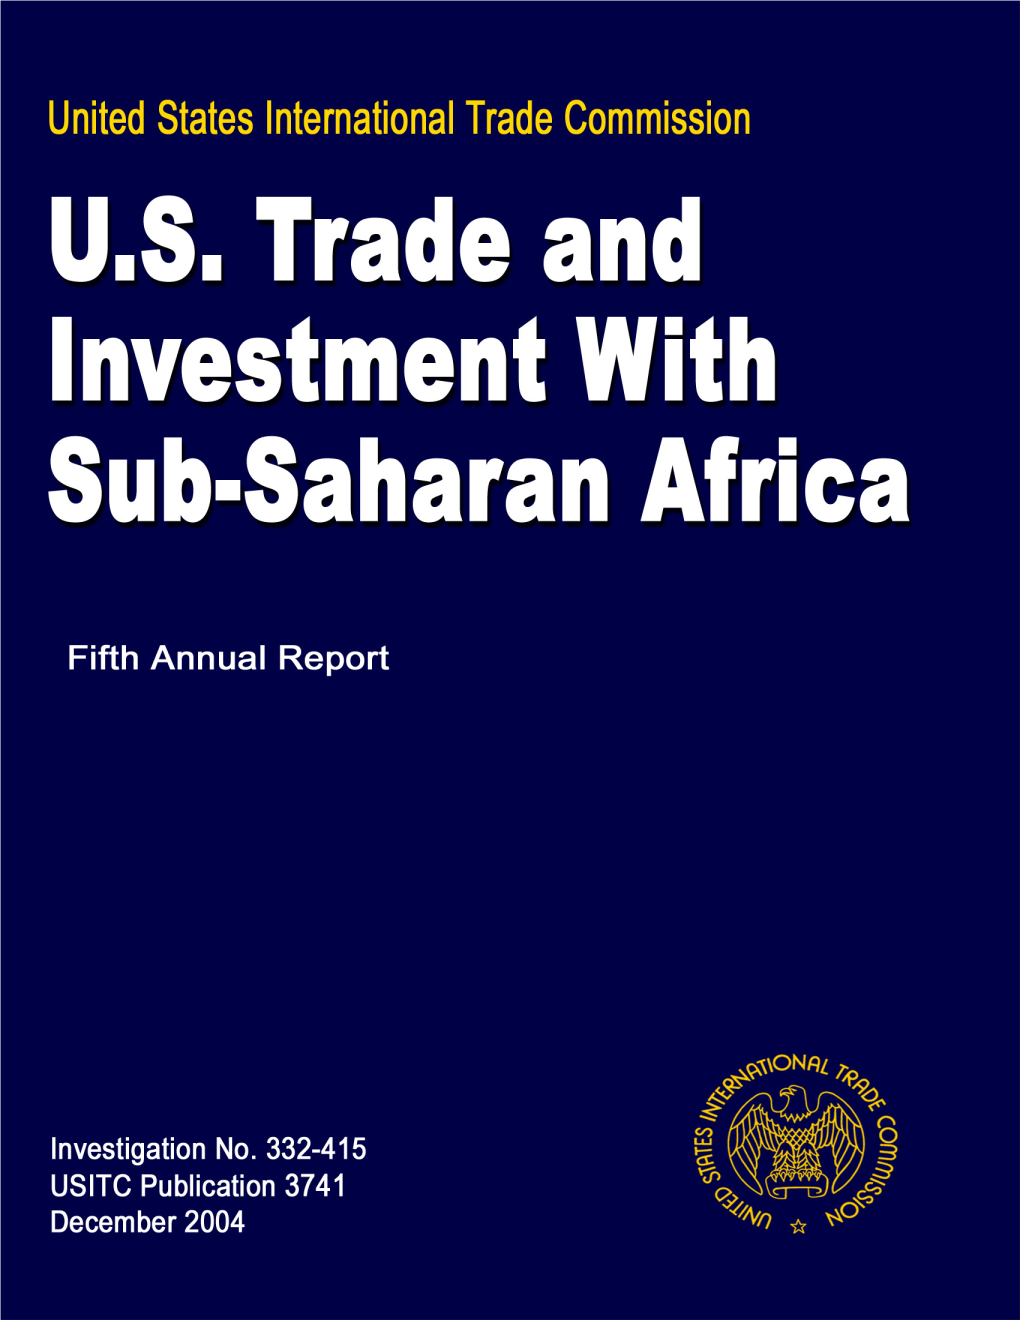 U.S. Trade and Investment with Sub-Saharan Africa Fifth Annual Report